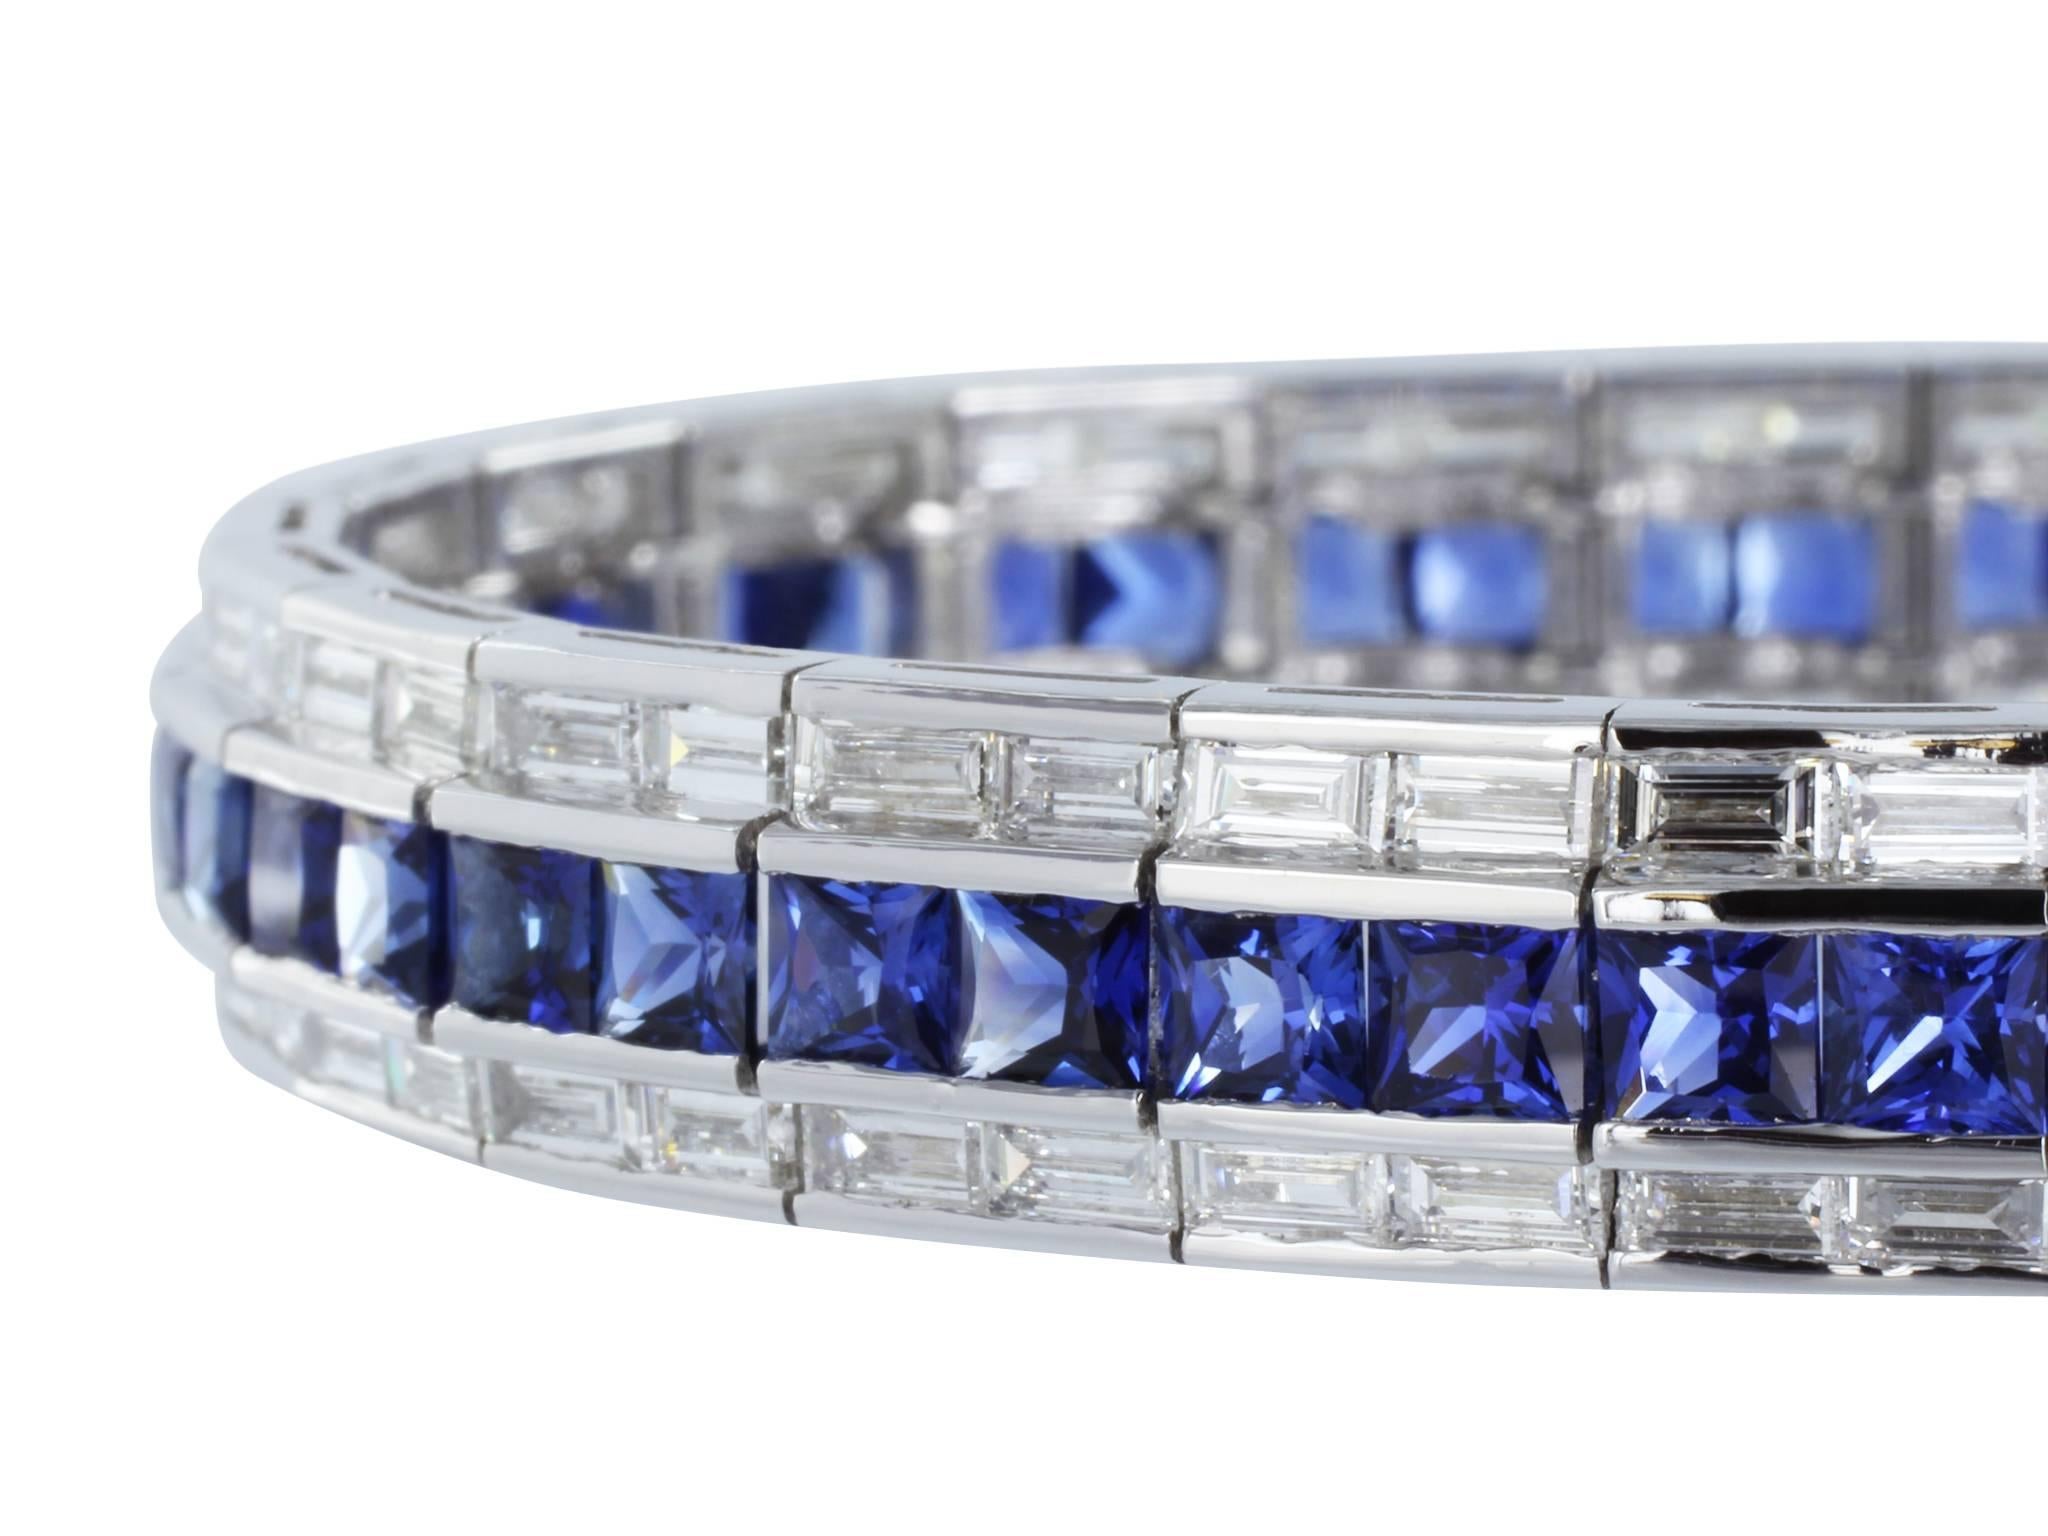 18 karat white gold flexible 3 row bracelet consisting of 1 center row of 52 french cut sapphires having a total weight of 12.69 carats with 2 rows of baguette cut diamond on either side having a total weight of 6.59 carats.